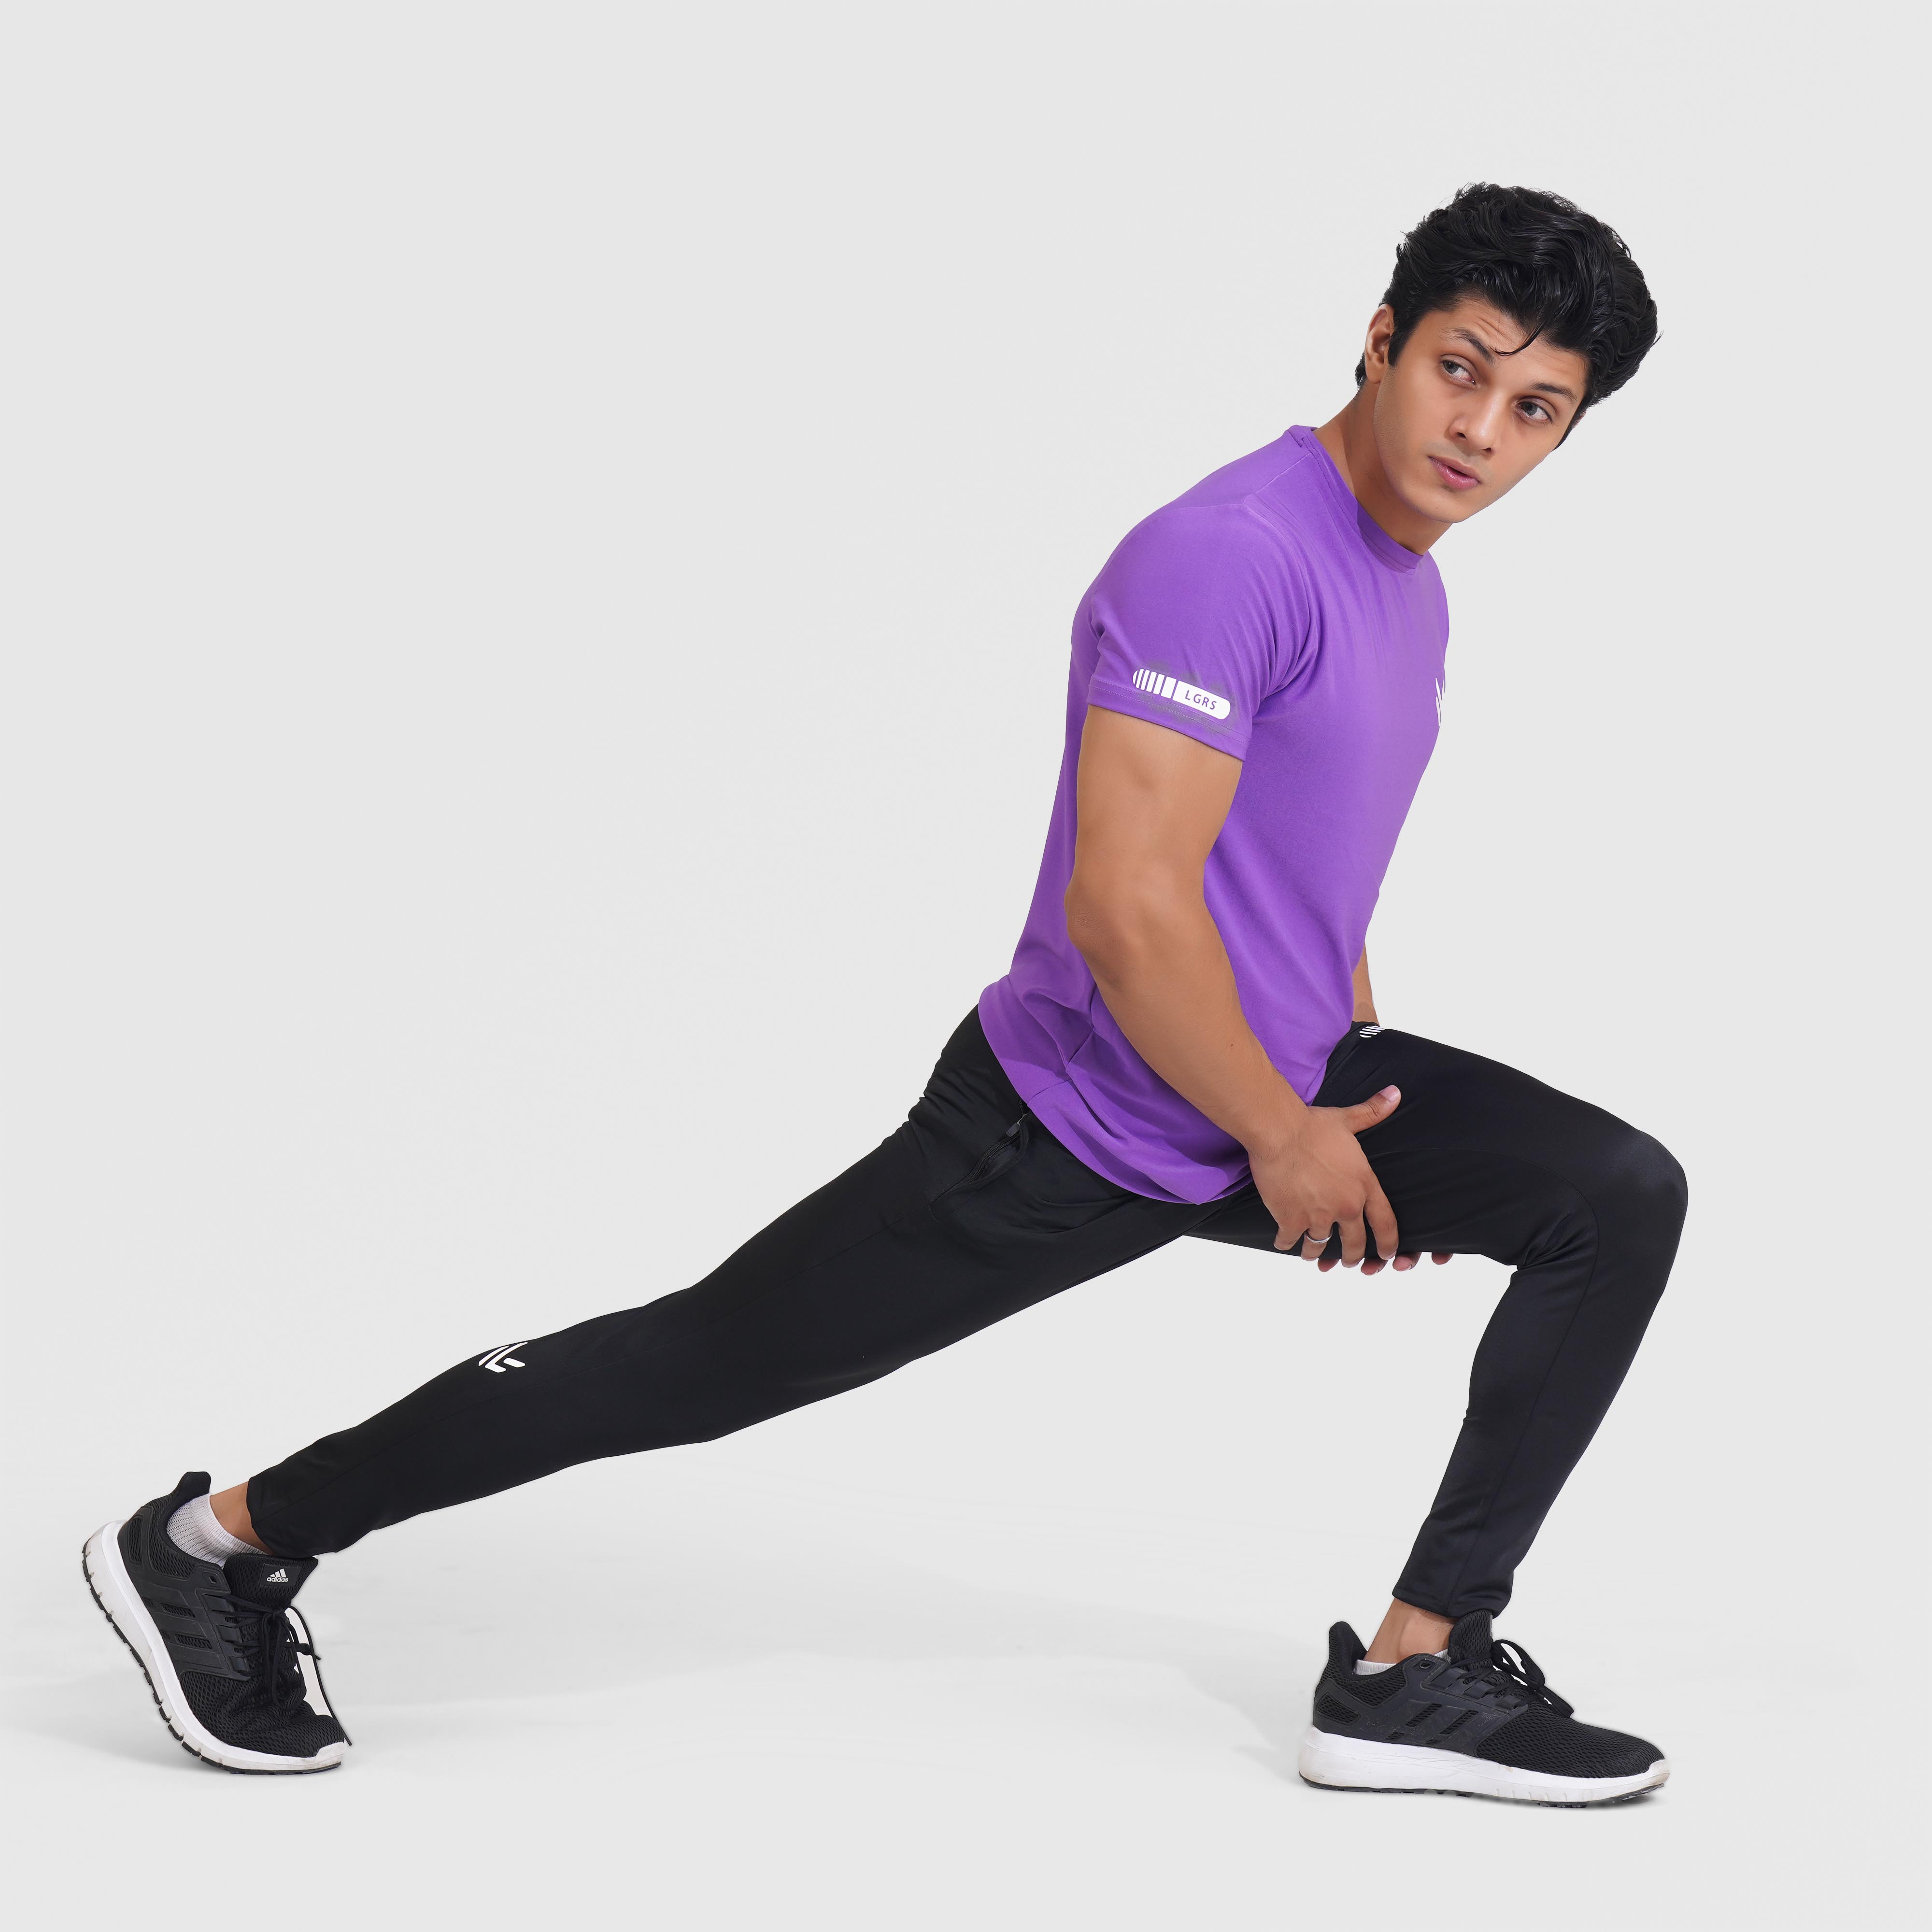 EliteFit Orchid Compression TEE